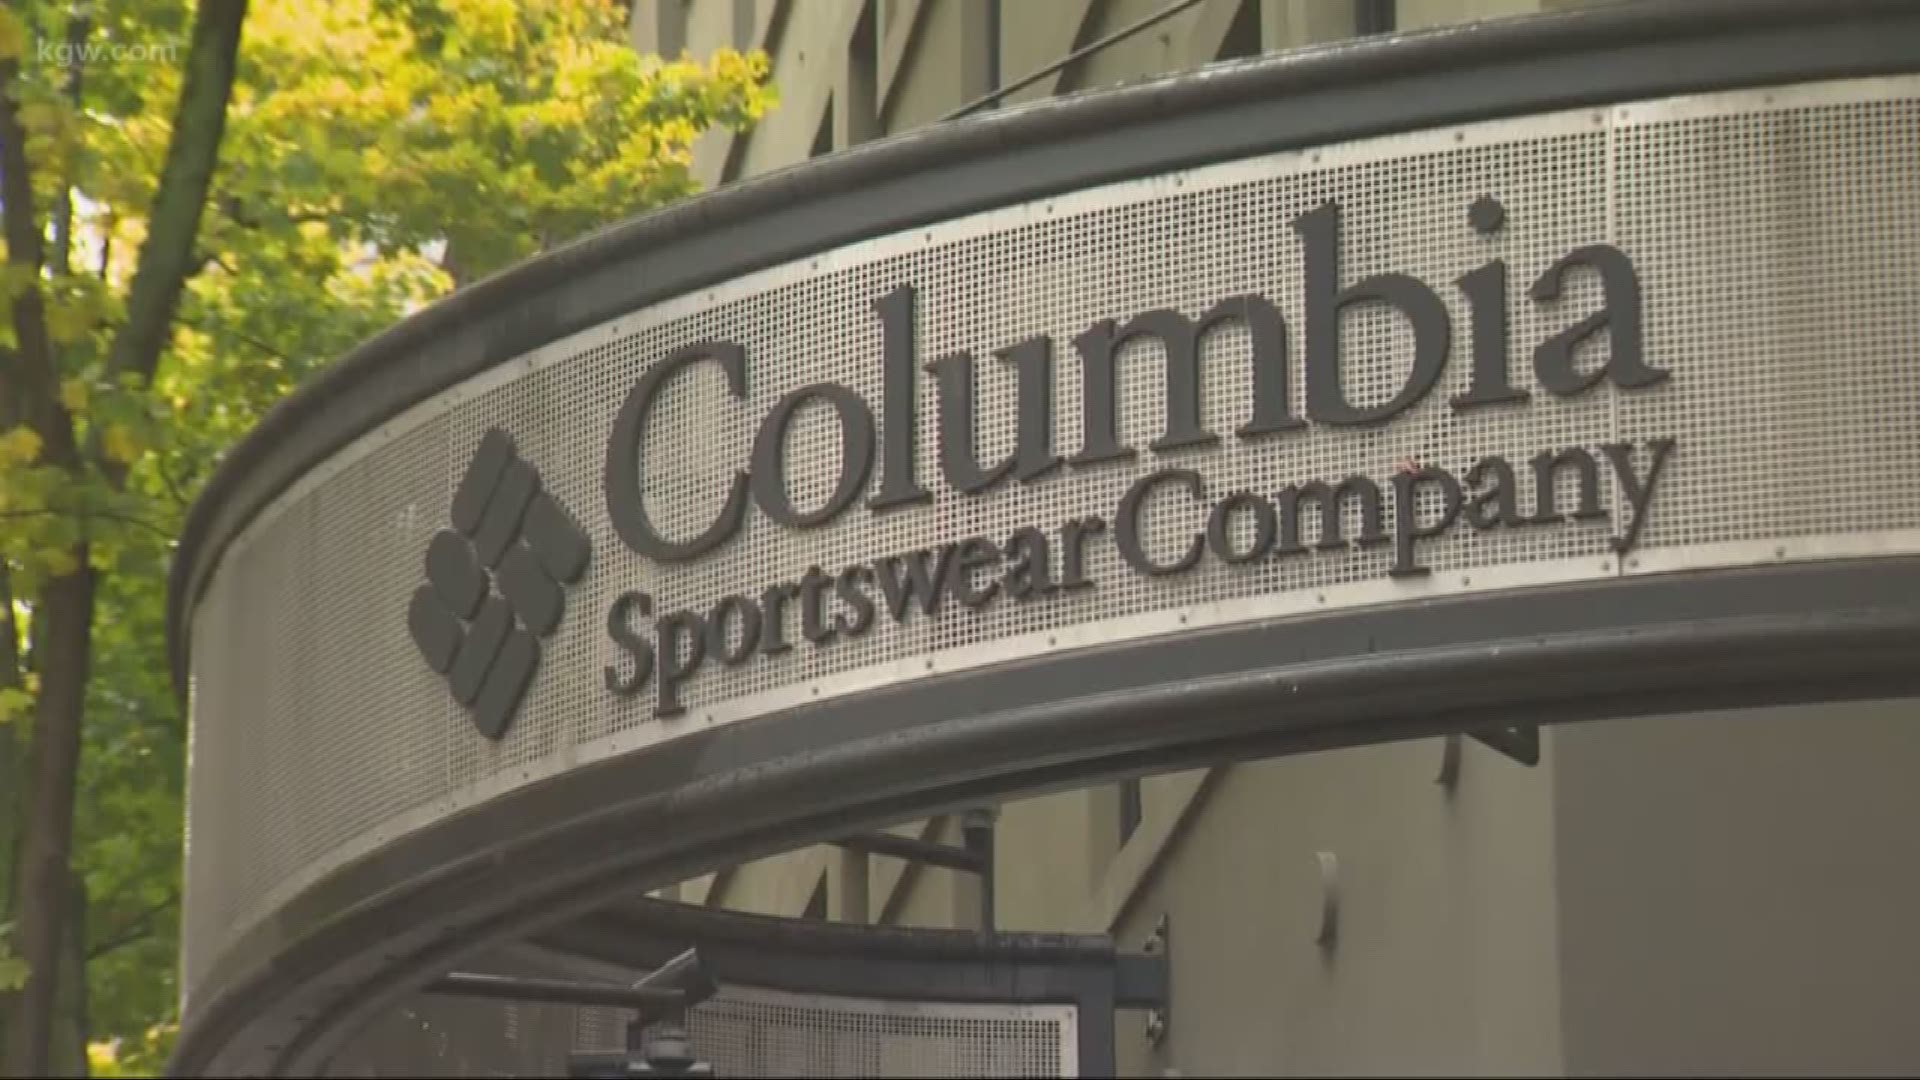 Columbia Sportswear is considering pulling its Sorel brand out of its Portland office due to problems with homeless.